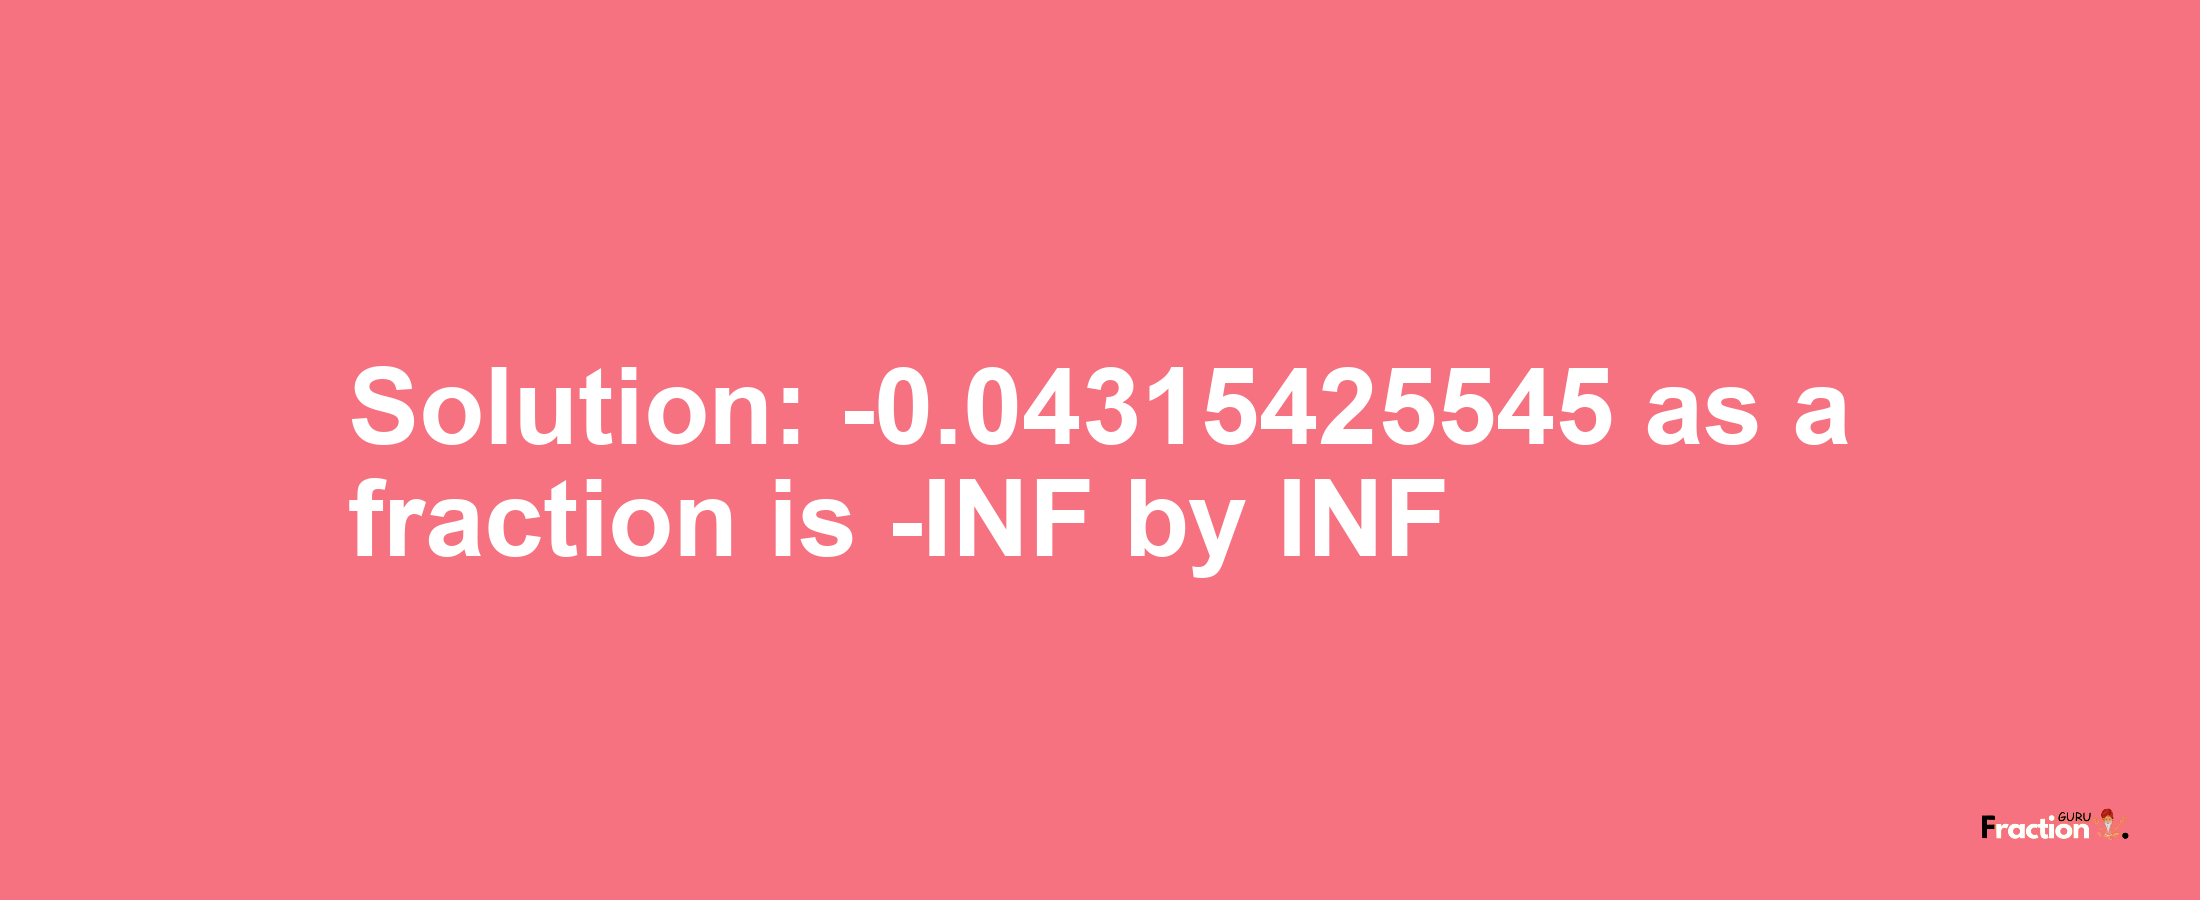 Solution:-0.04315425545 as a fraction is -INF/INF